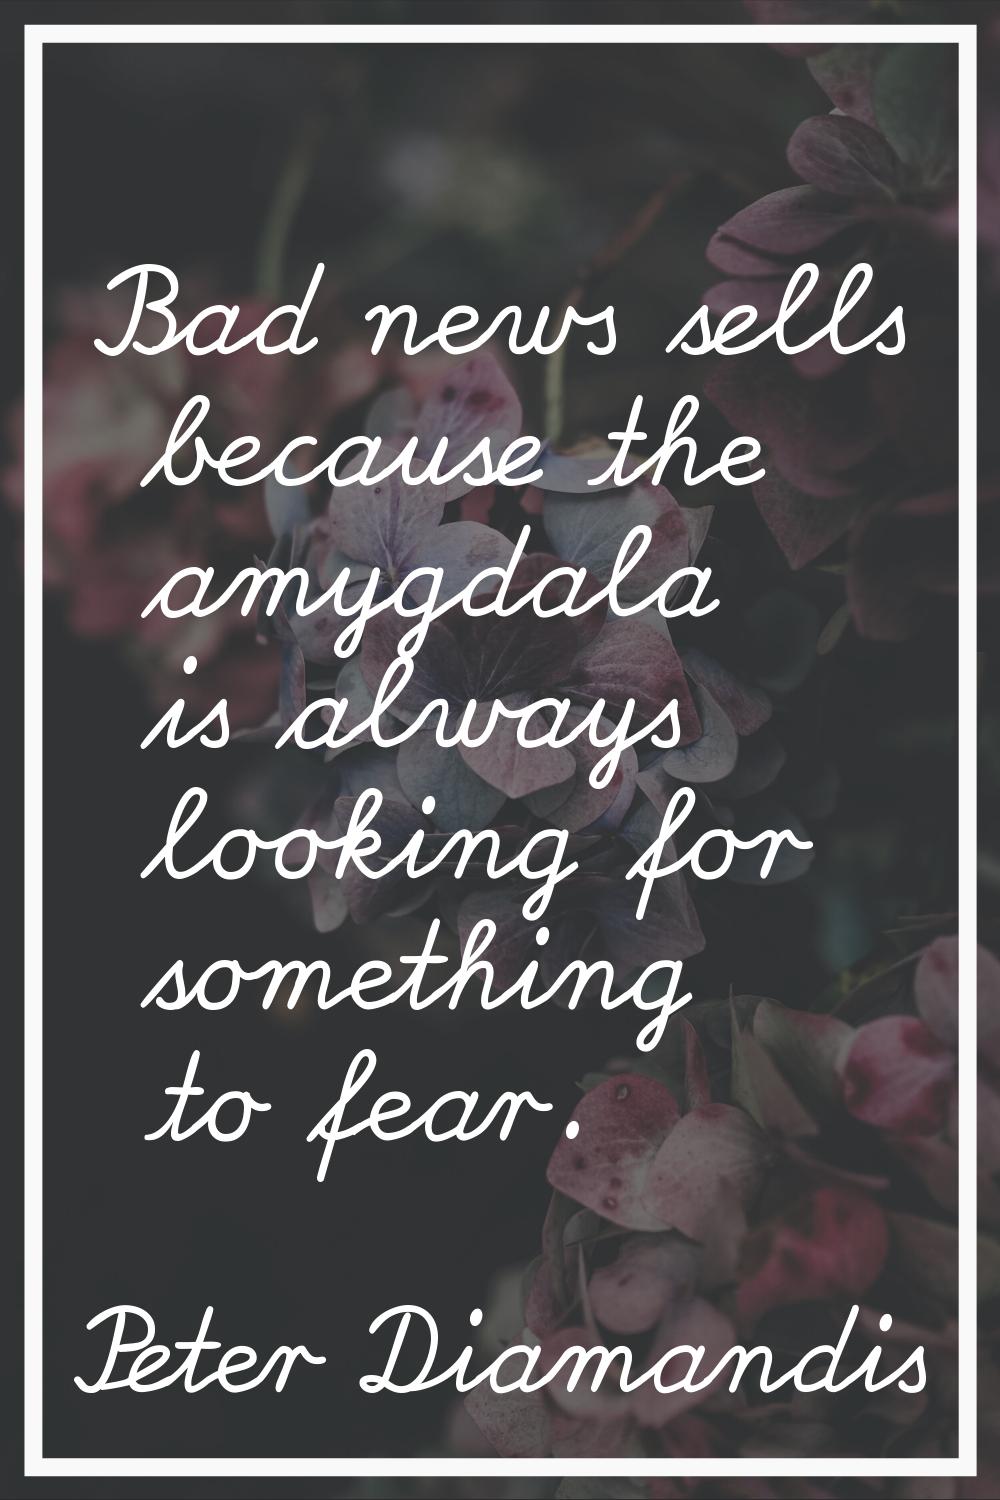 Bad news sells because the amygdala is always looking for something to fear.